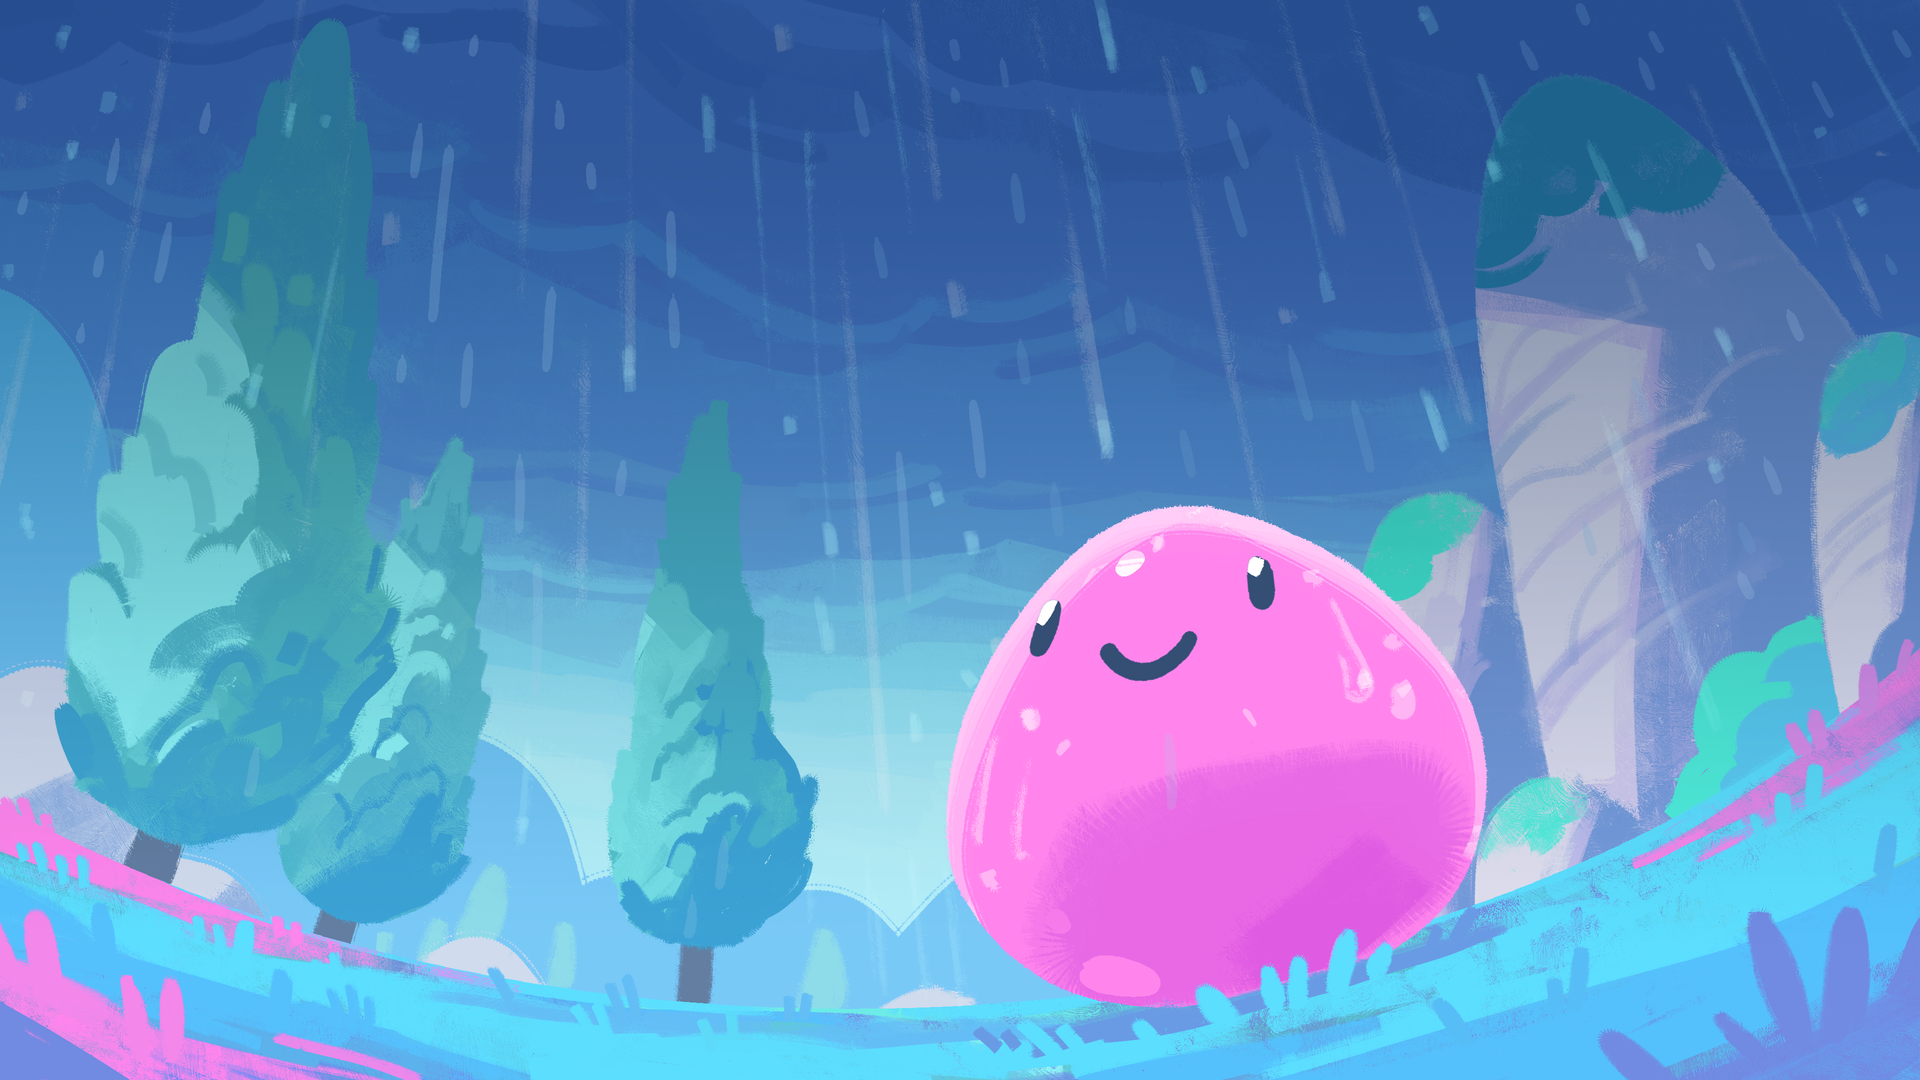 Digital illustration of a smiling Pink Slime looking up to the sky. The weather is dark and gloomy with rain gently falling down, but there is an atmosphere of calm and contentment.